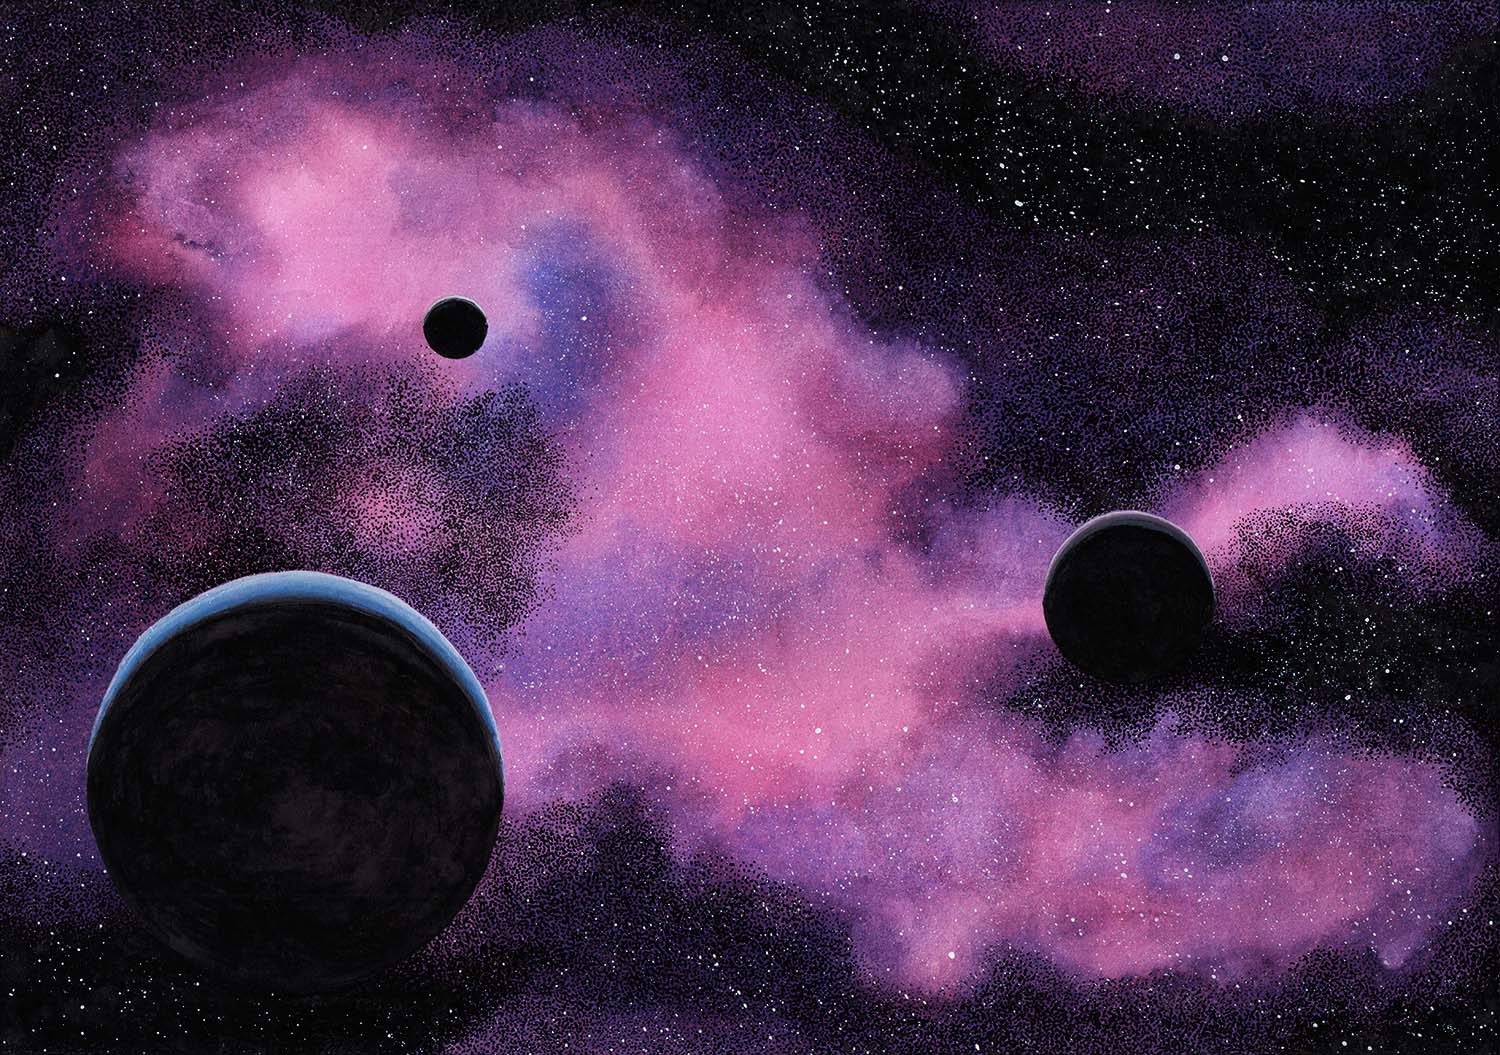 Painting Space: Let's Explore the Universe!